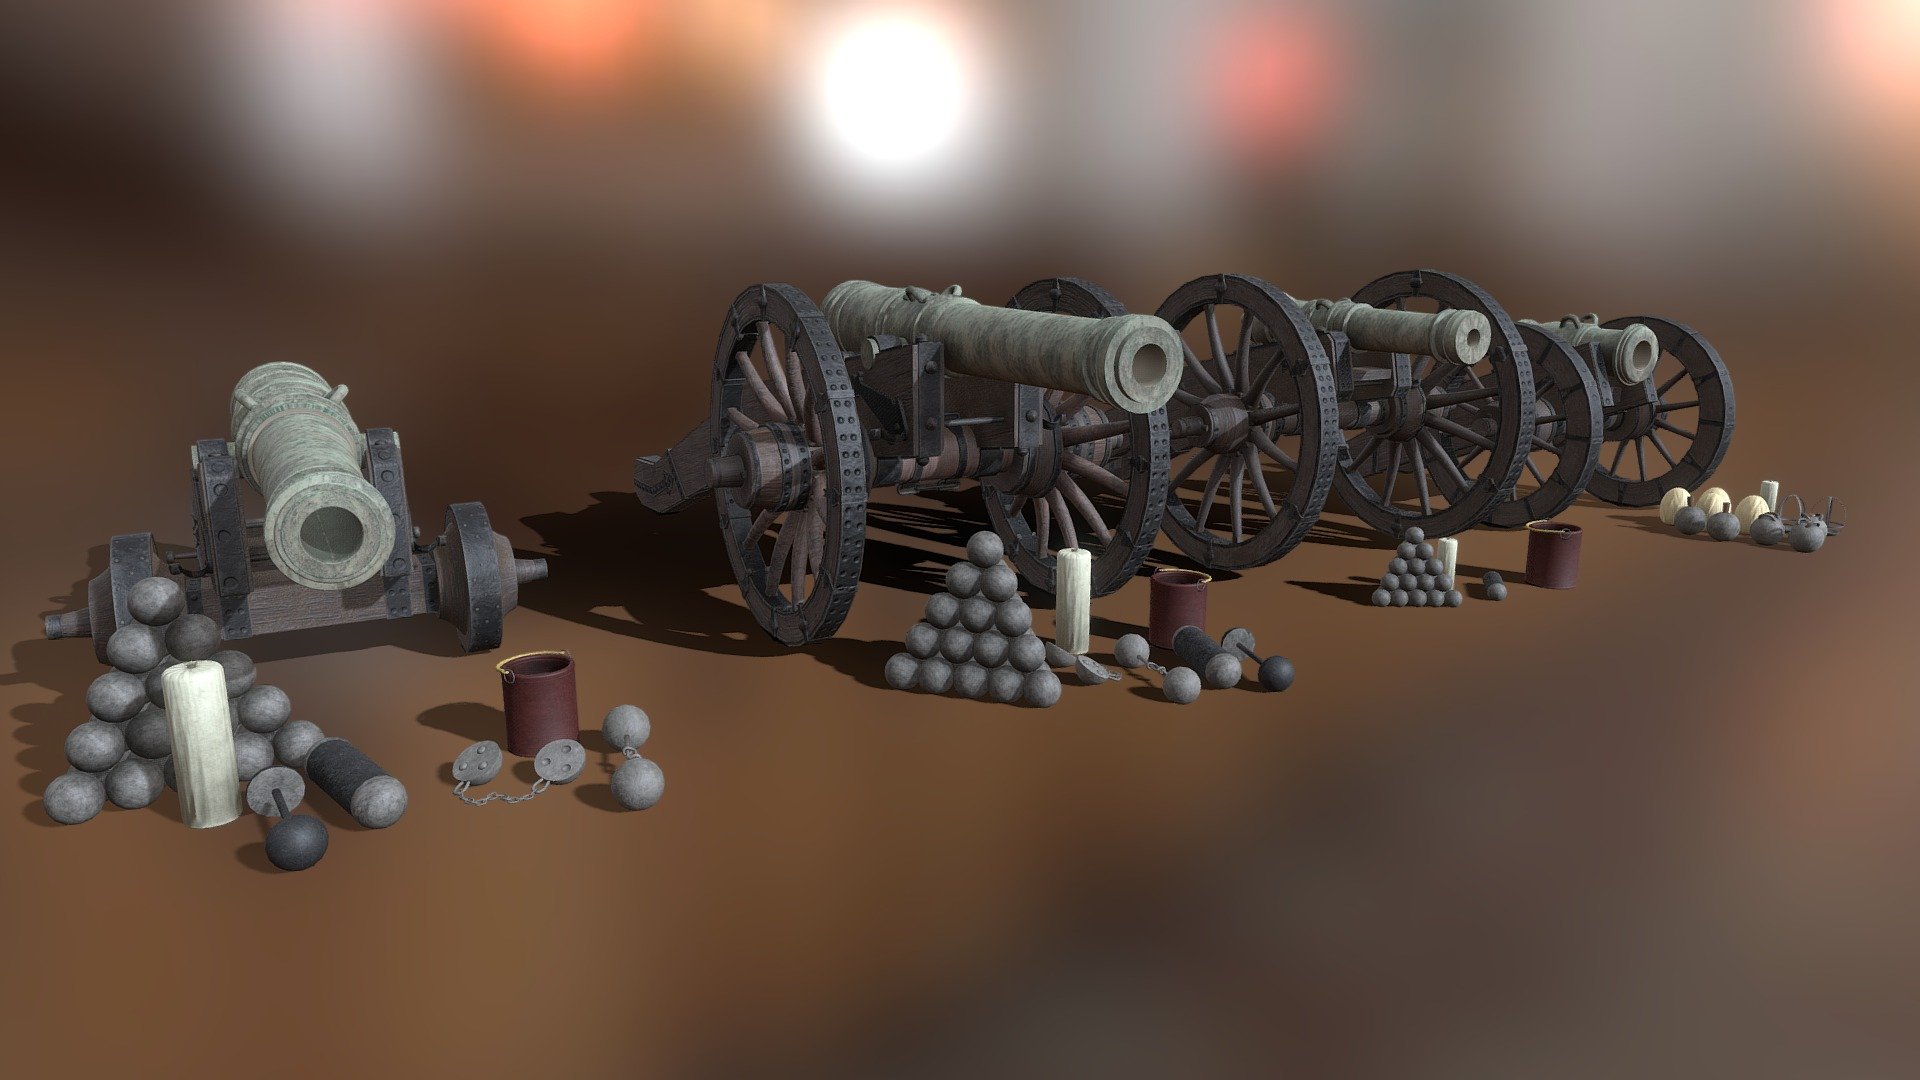 Overview of 17th century cannons with their respective projectiles and charges. Reconstructions are based upon the the 3 volumes of Mémoires d'artillerie by Surirey de Saint Remy, the French &ldquo;lieutenant du Grand-Maître d’artillerie de France